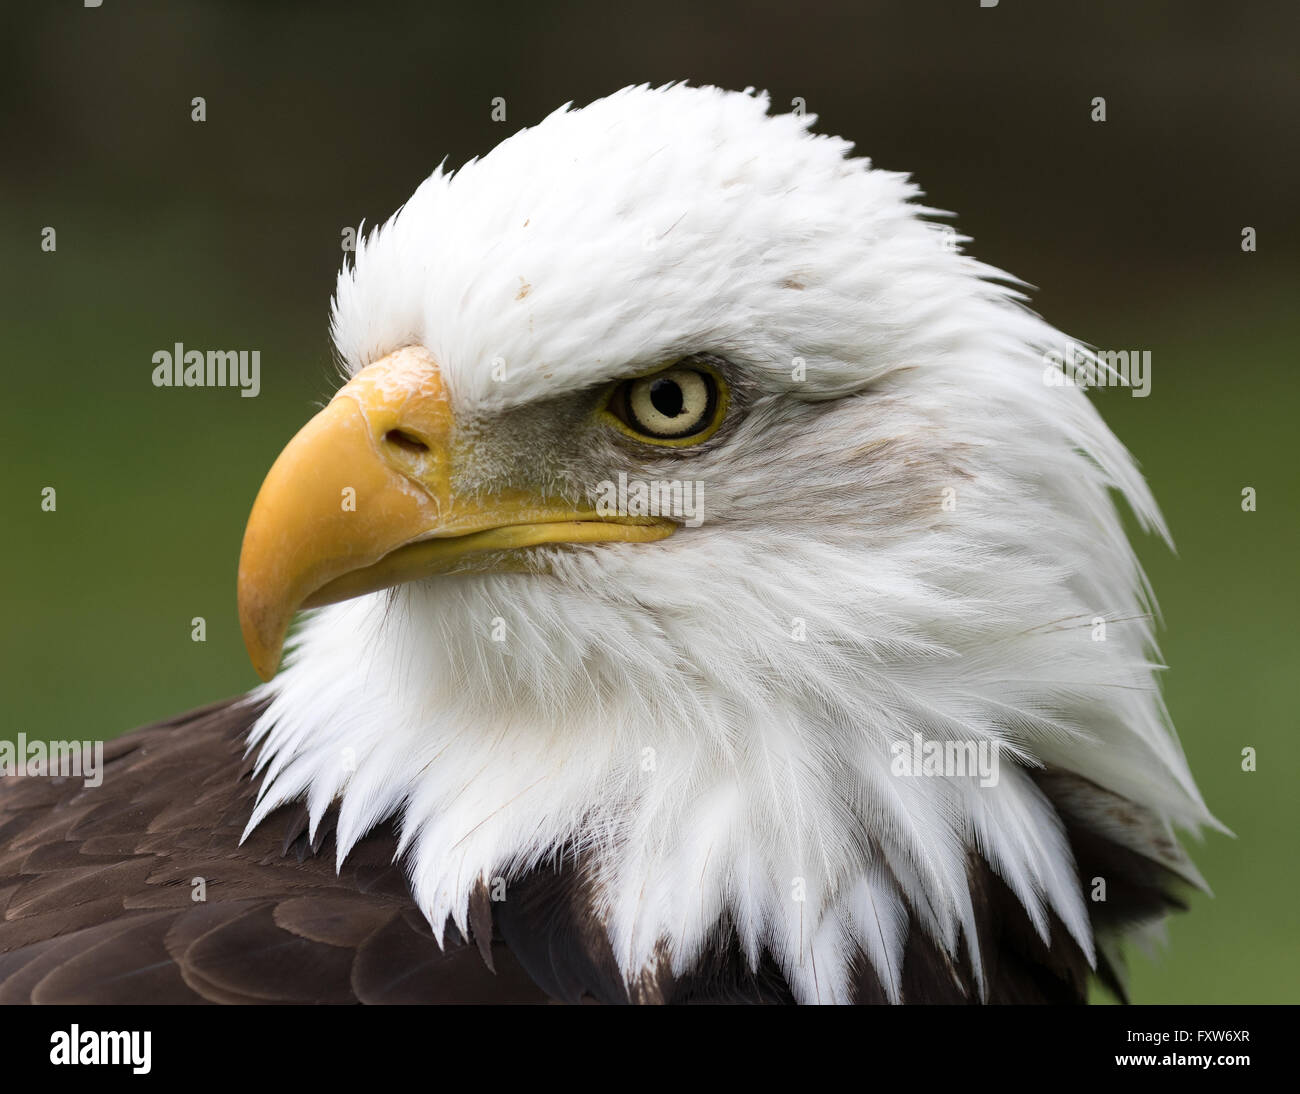 Close up head-shot of a Bald Headed Eagle with green background. Stock Photo